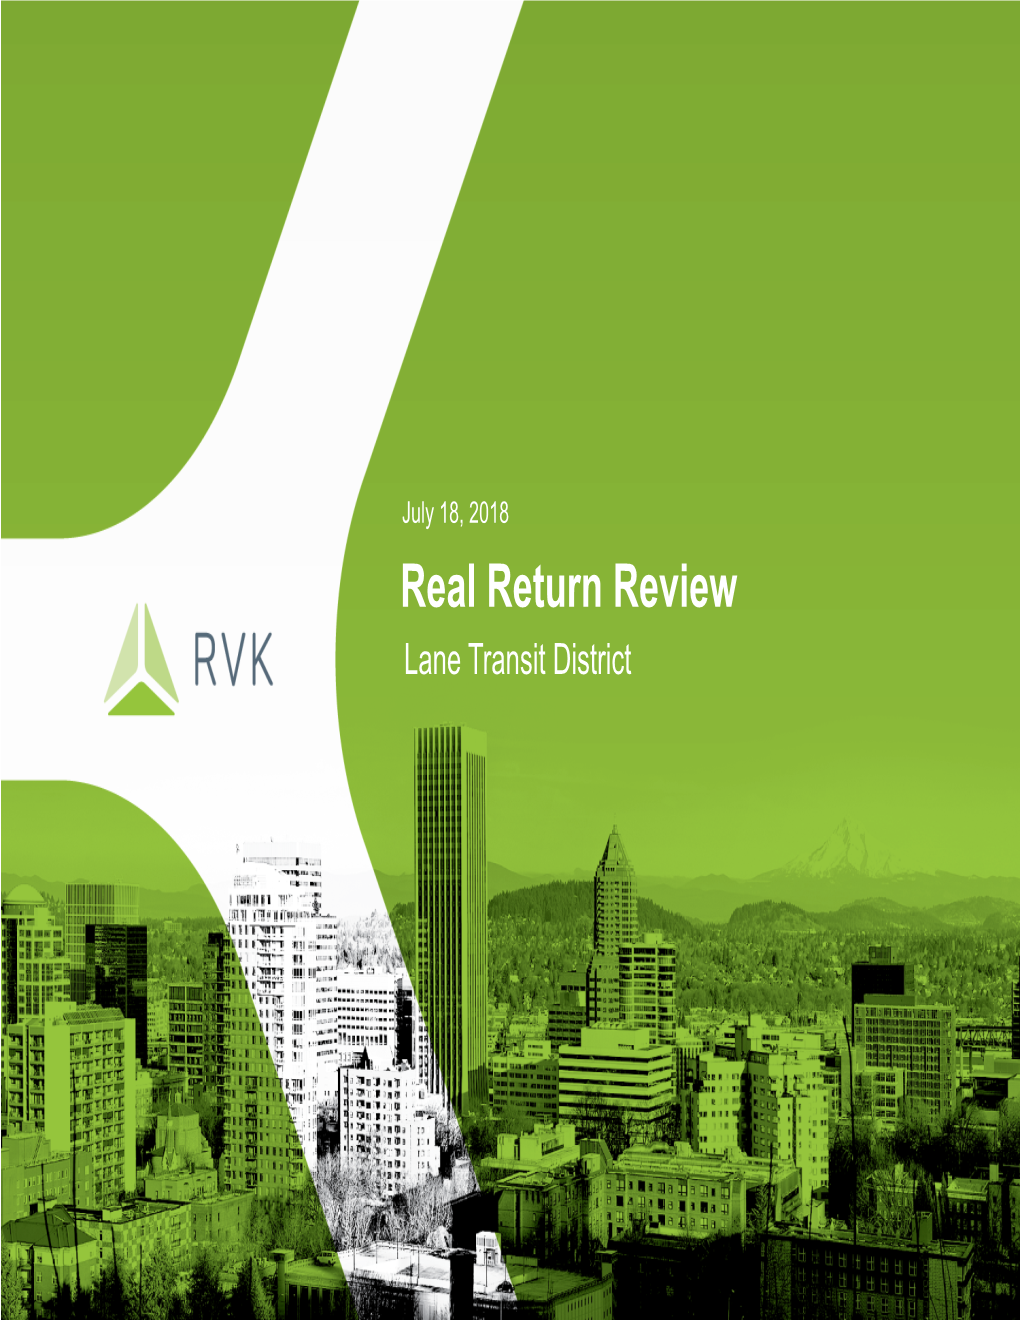 Real Return Review Lane Transit District Why Are We Reviewing Real Return?